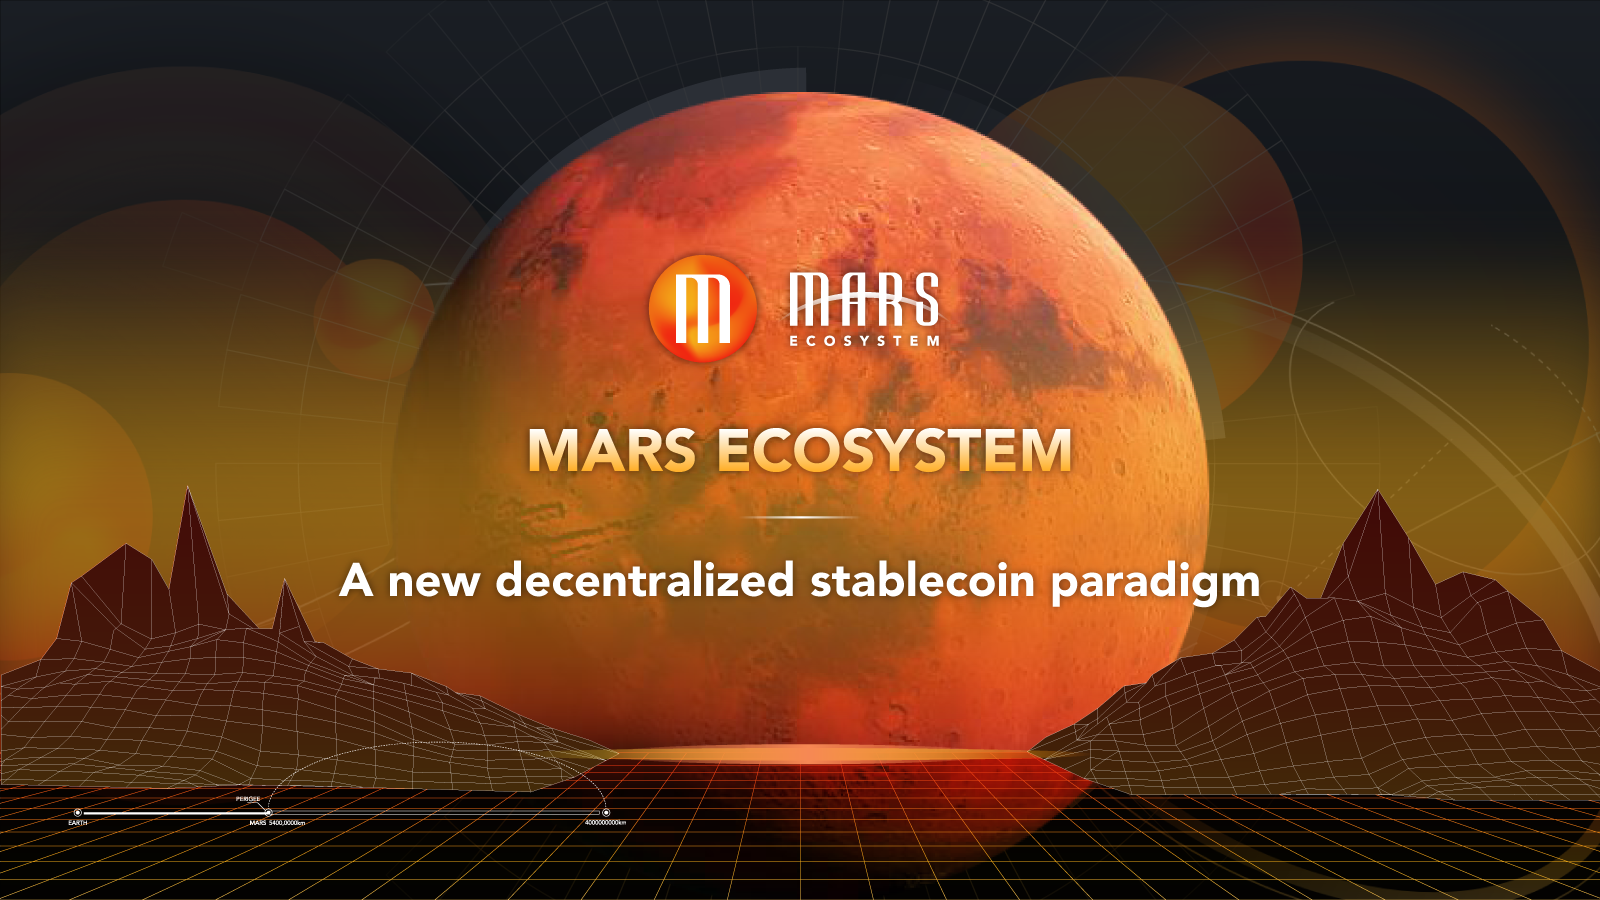 Mars Ecosystem - A new decentralized stablecoin paradigm